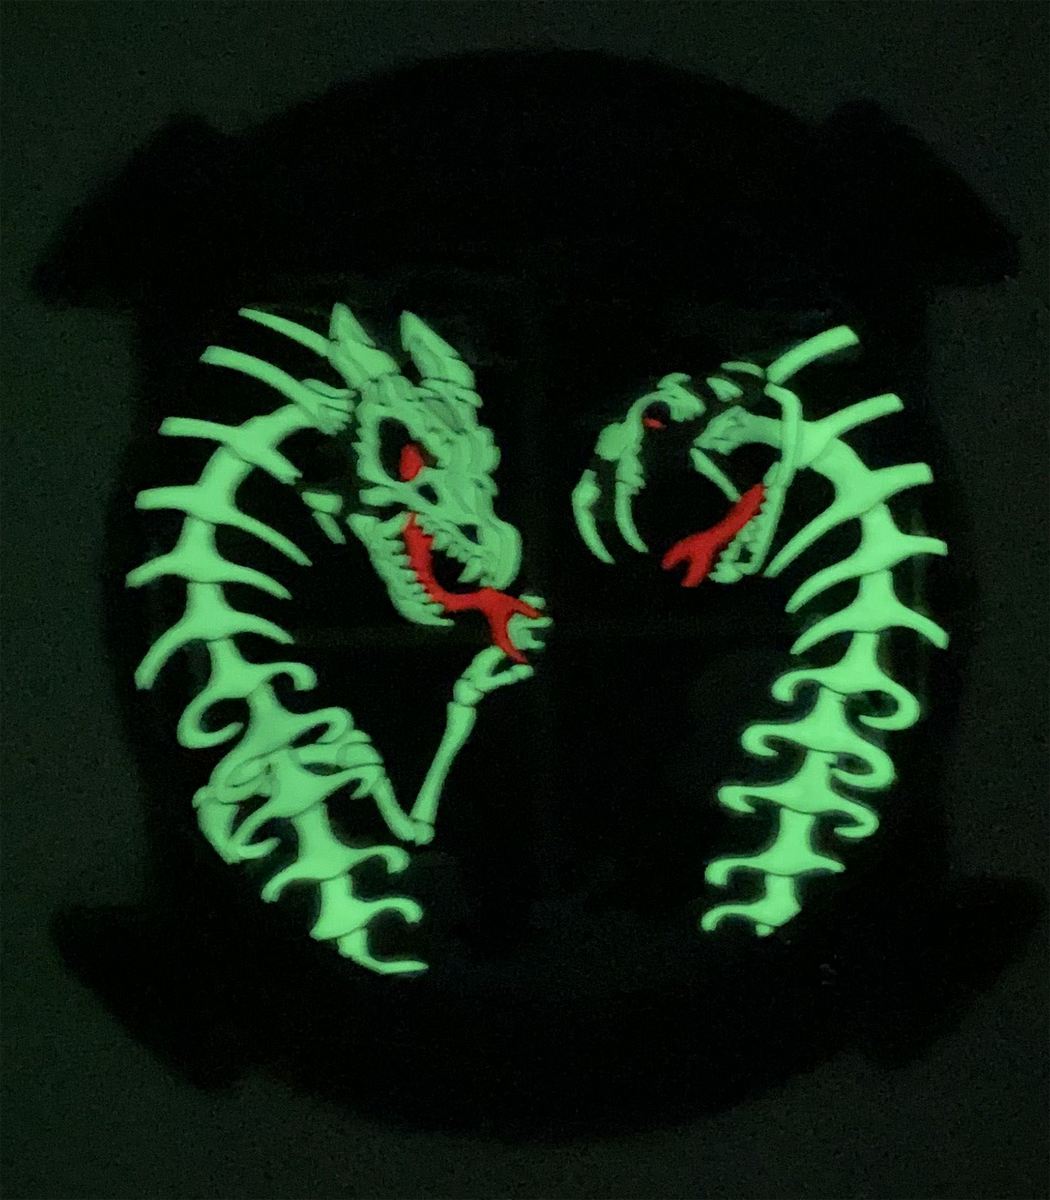 INFANTRYPRO Patch Thermocollant Couture, Dragon Scratch Patch